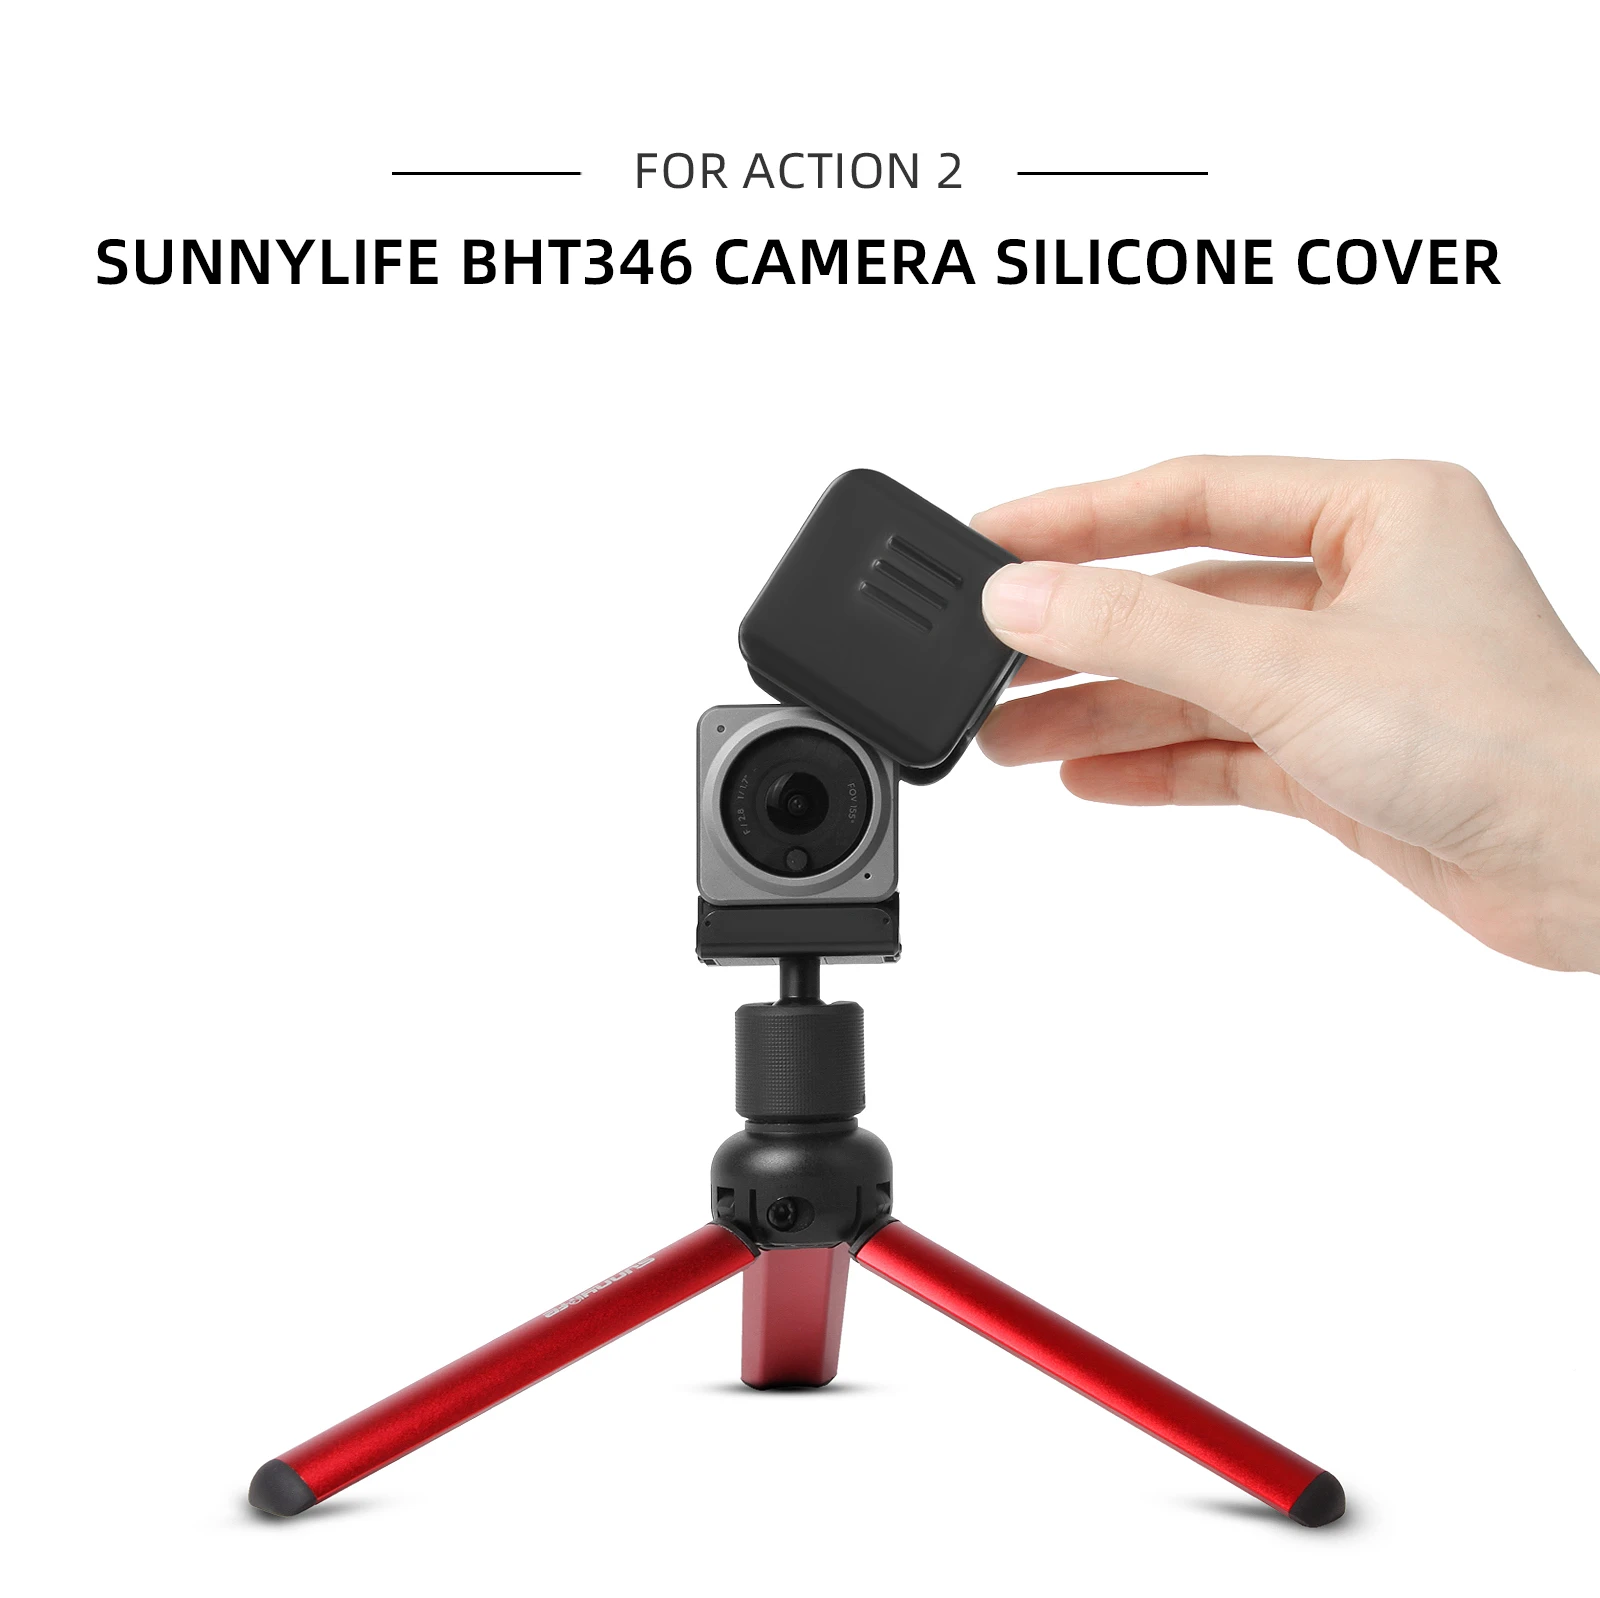 

For DJI OSMO Action 2 Camera Lens Protector Cover Silicone Protective Cap Scratch-proof Cace for DJI Action 2 Camera Accessories